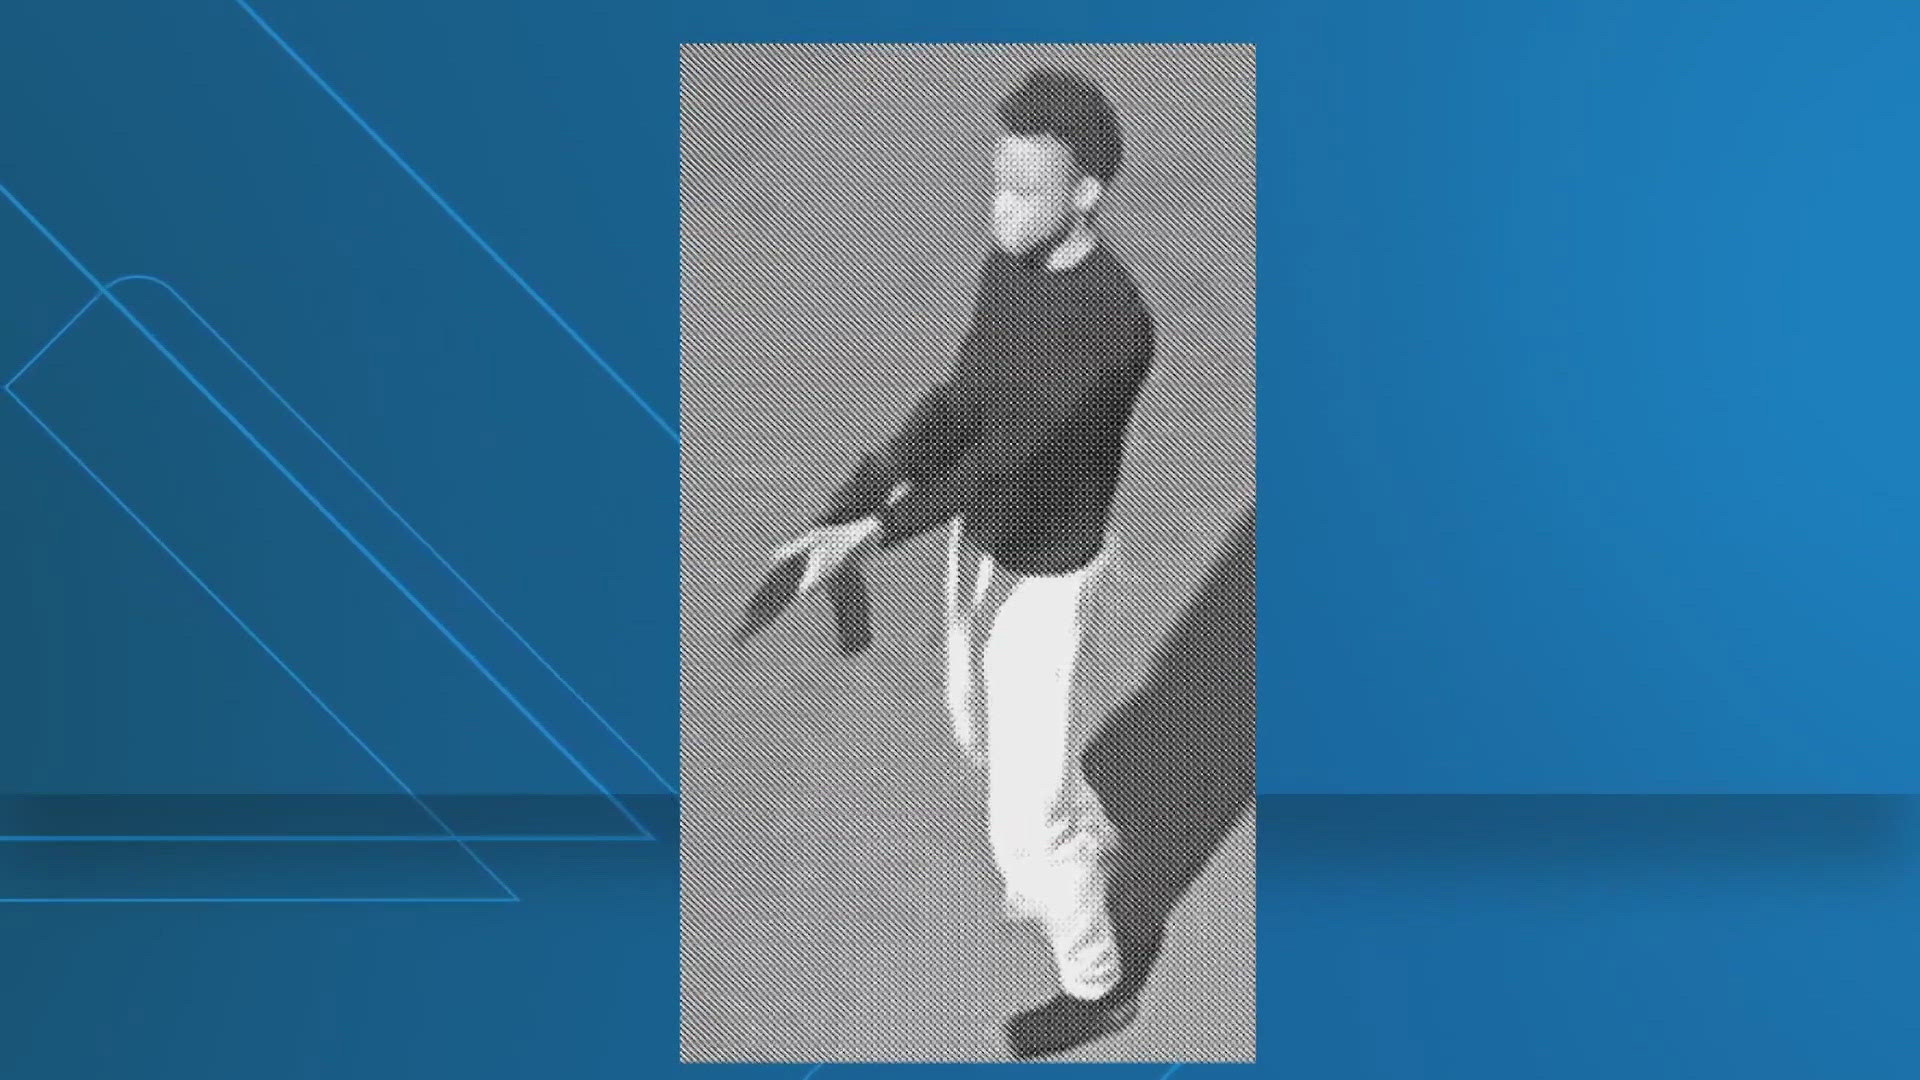 He is accused of firing 26 shots from an AR-15 rifle into a public DC Street. The US Attorney's office says they have multiple videos of him doing it.